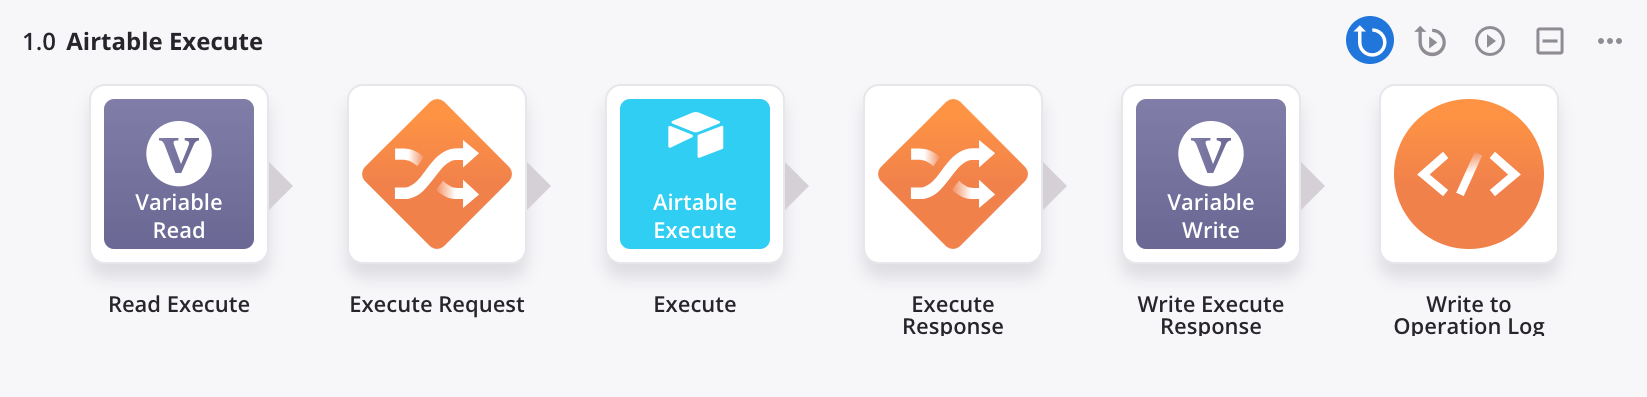 Airtable Execute operation